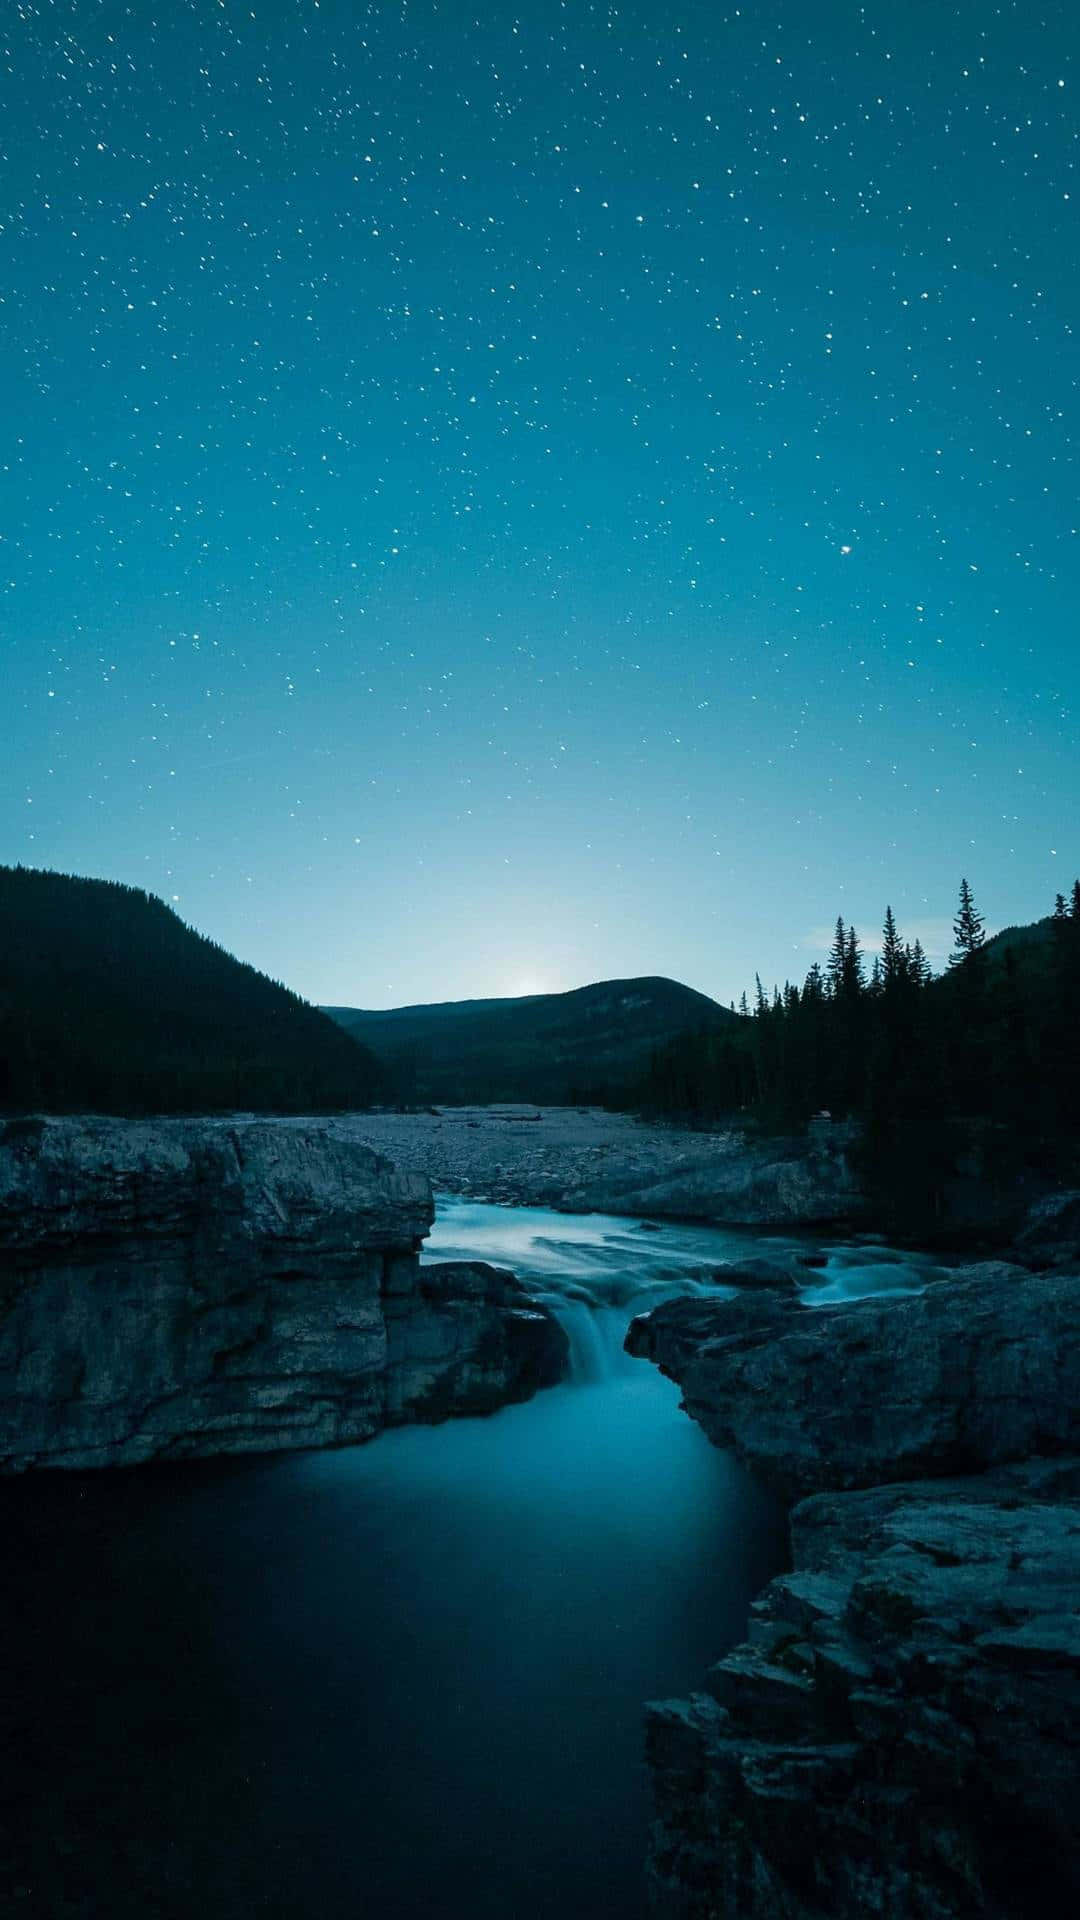 A River And Stars Under A Dark Sky Wallpaper